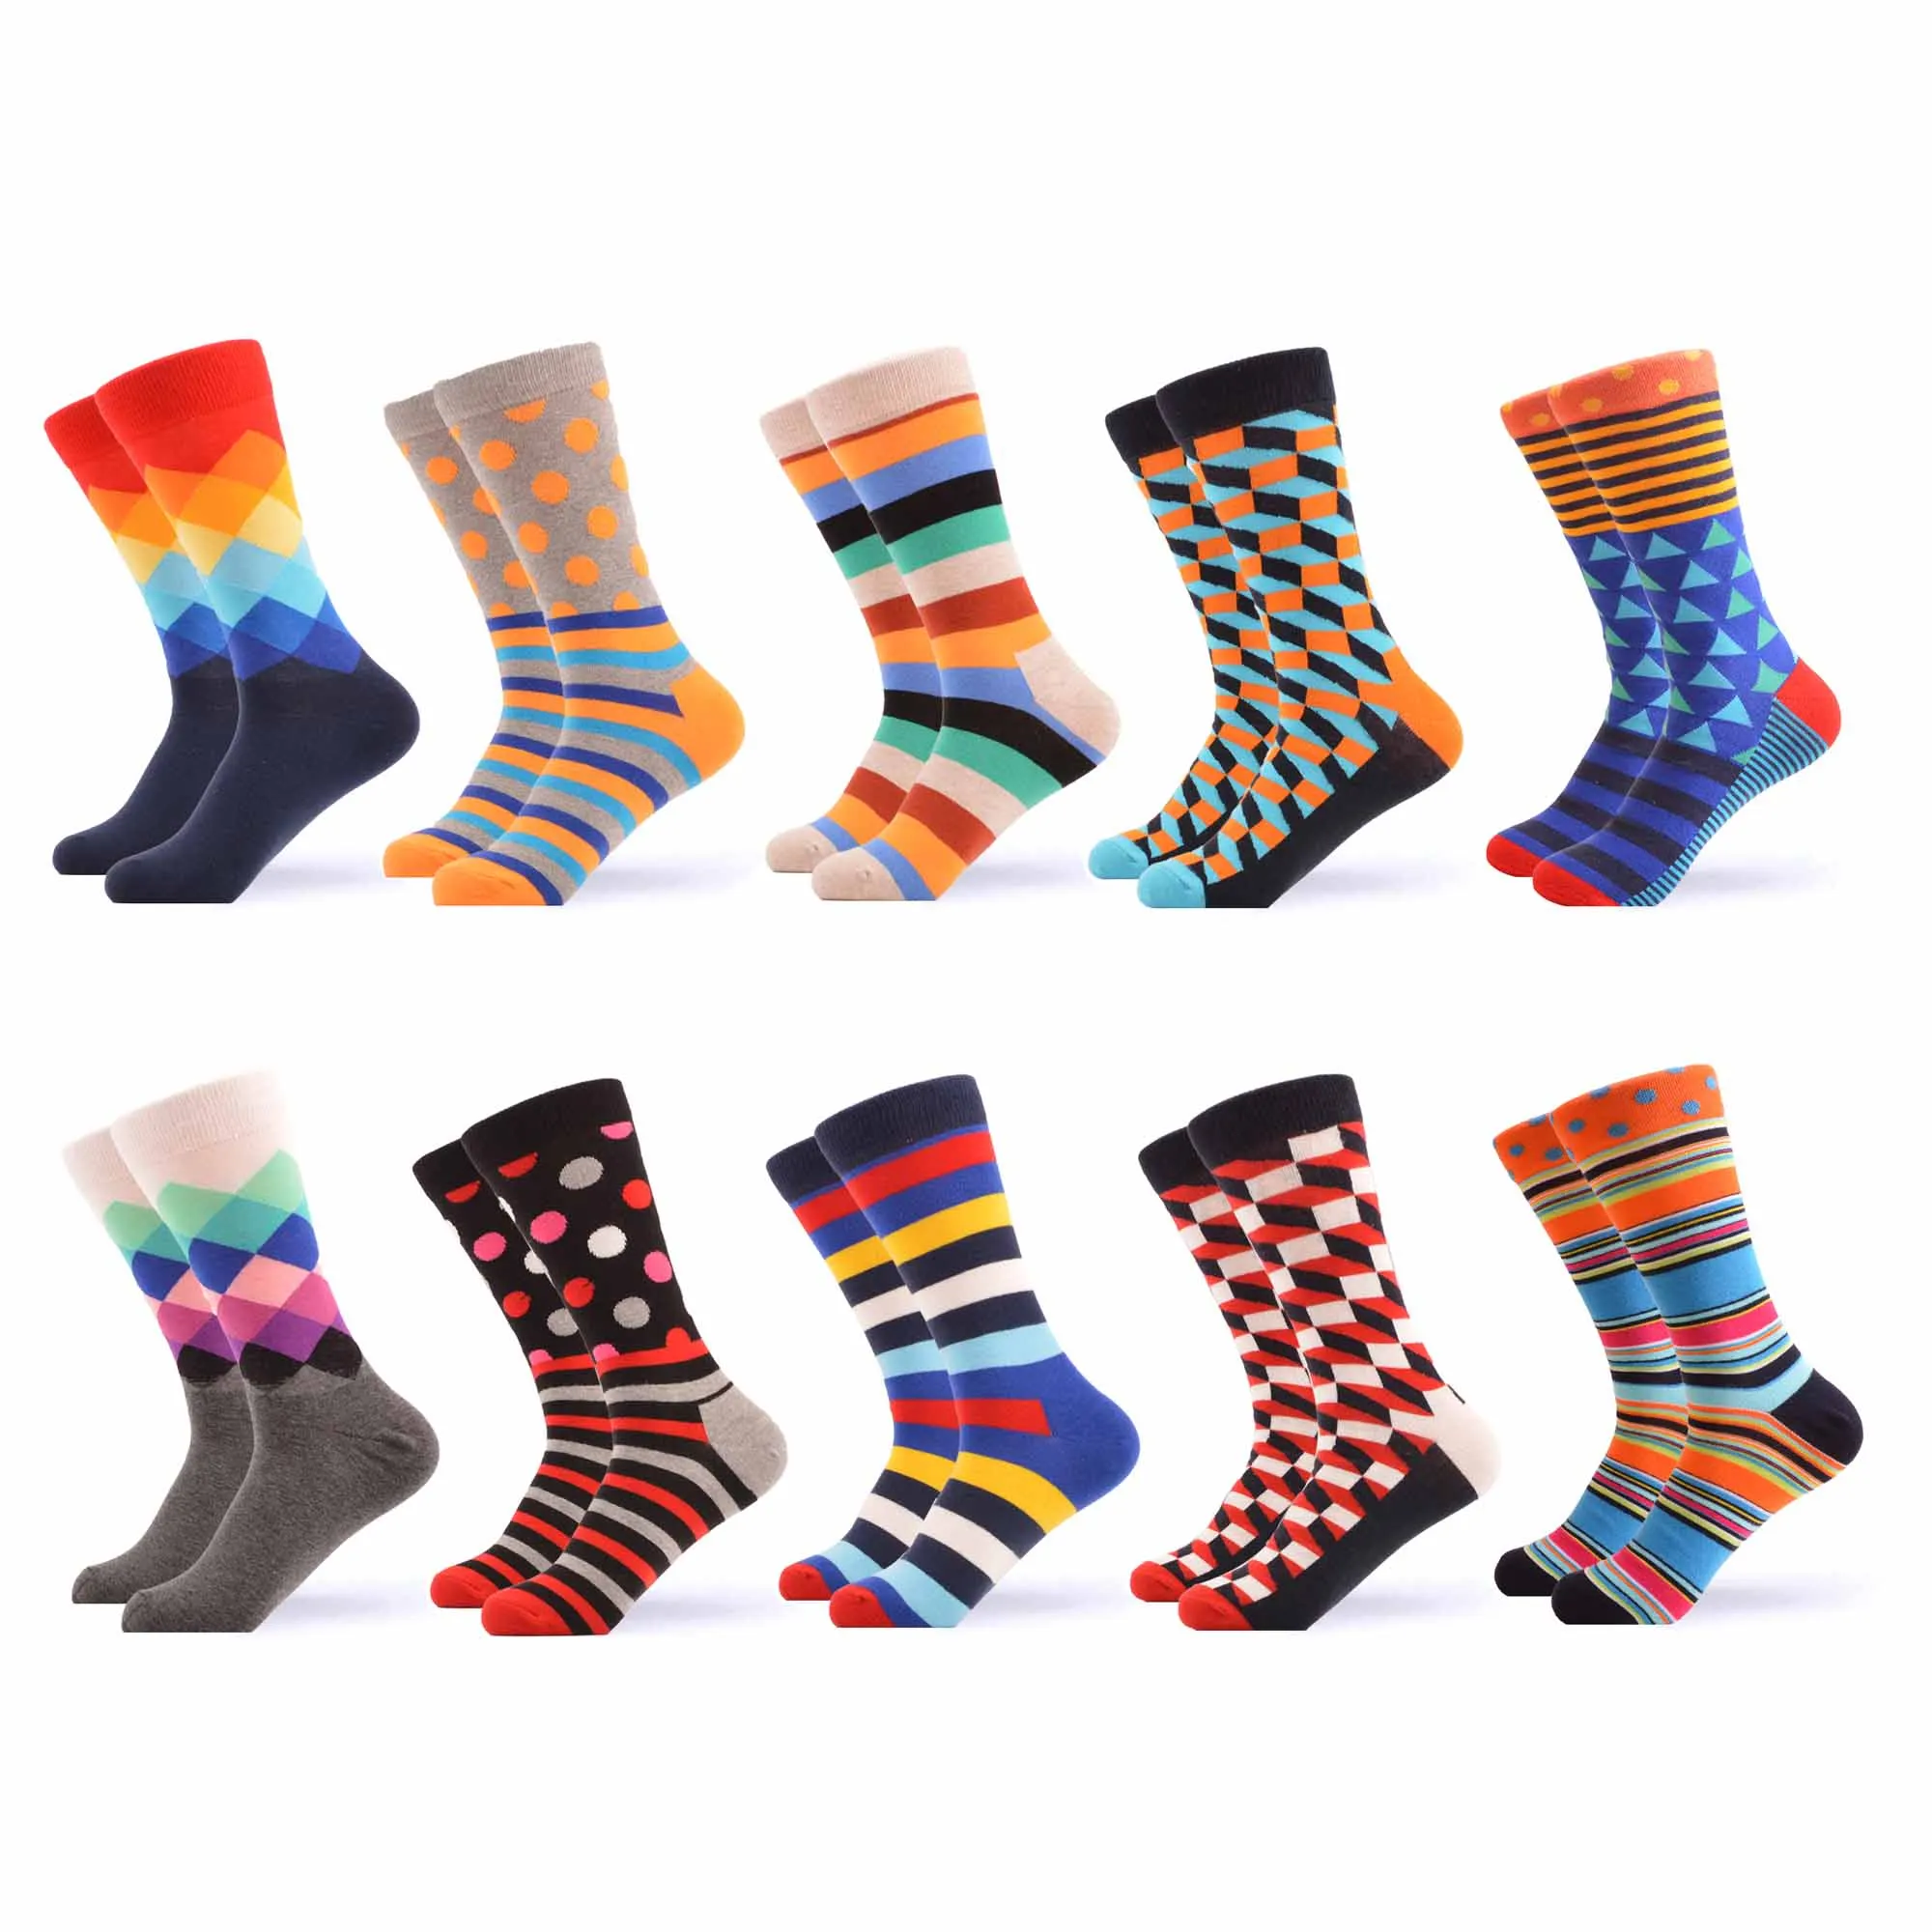 SANZETTI Men's Colorful Combed Cotton Happy Novelty Socks Hip Hop High Quality Skateboard Plaid Geometric Funny Socks For Gifts - Цвет: 06376 (10 pairs)